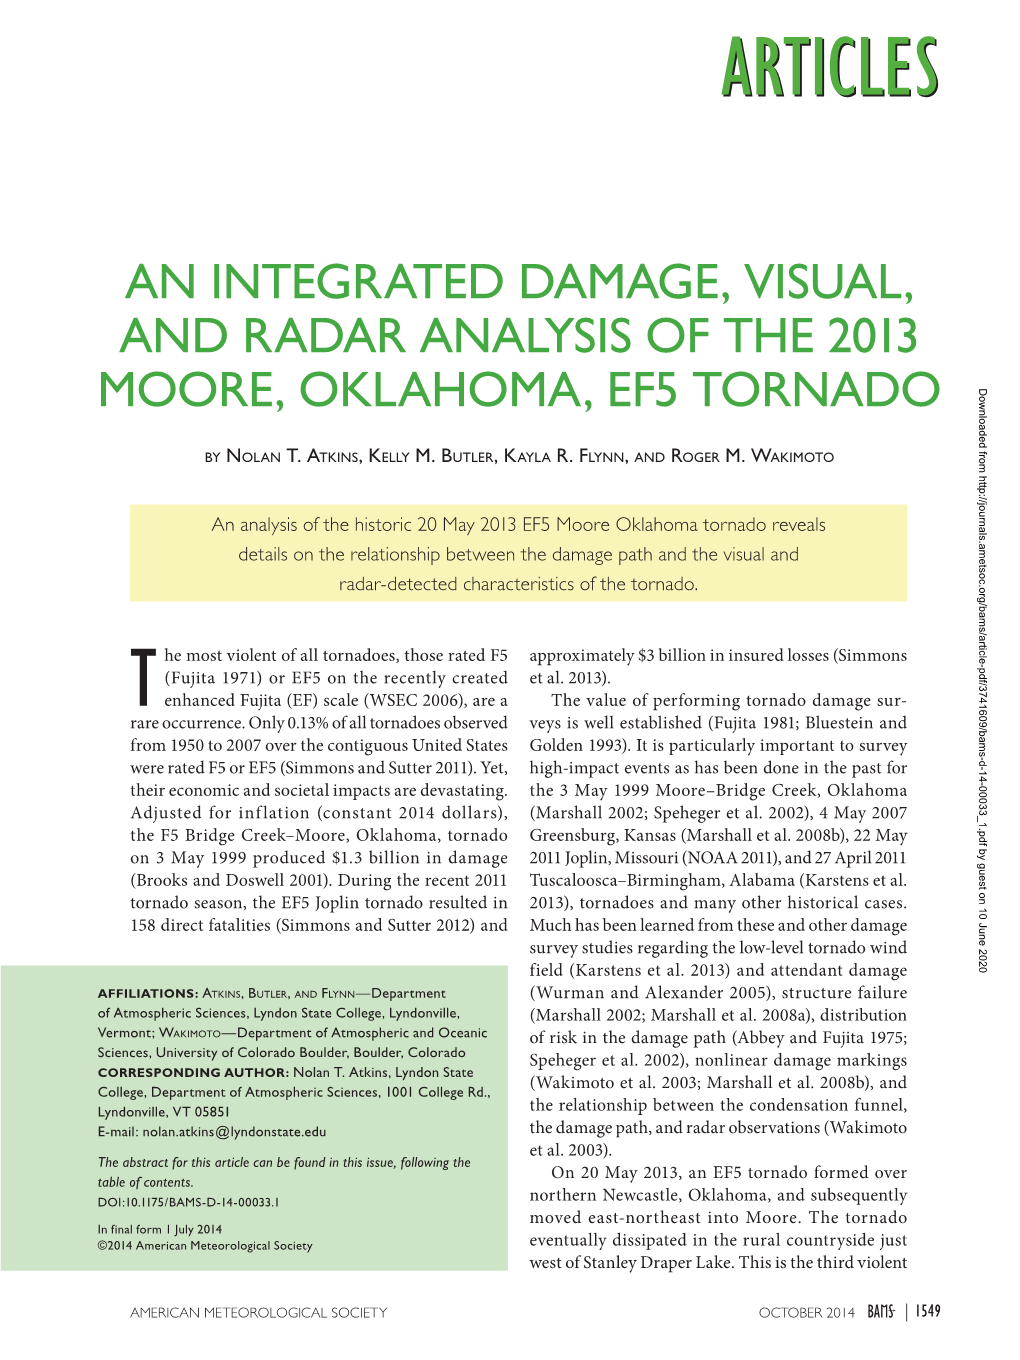 An Integrated Damage, Visual, and Radar Analysis of The